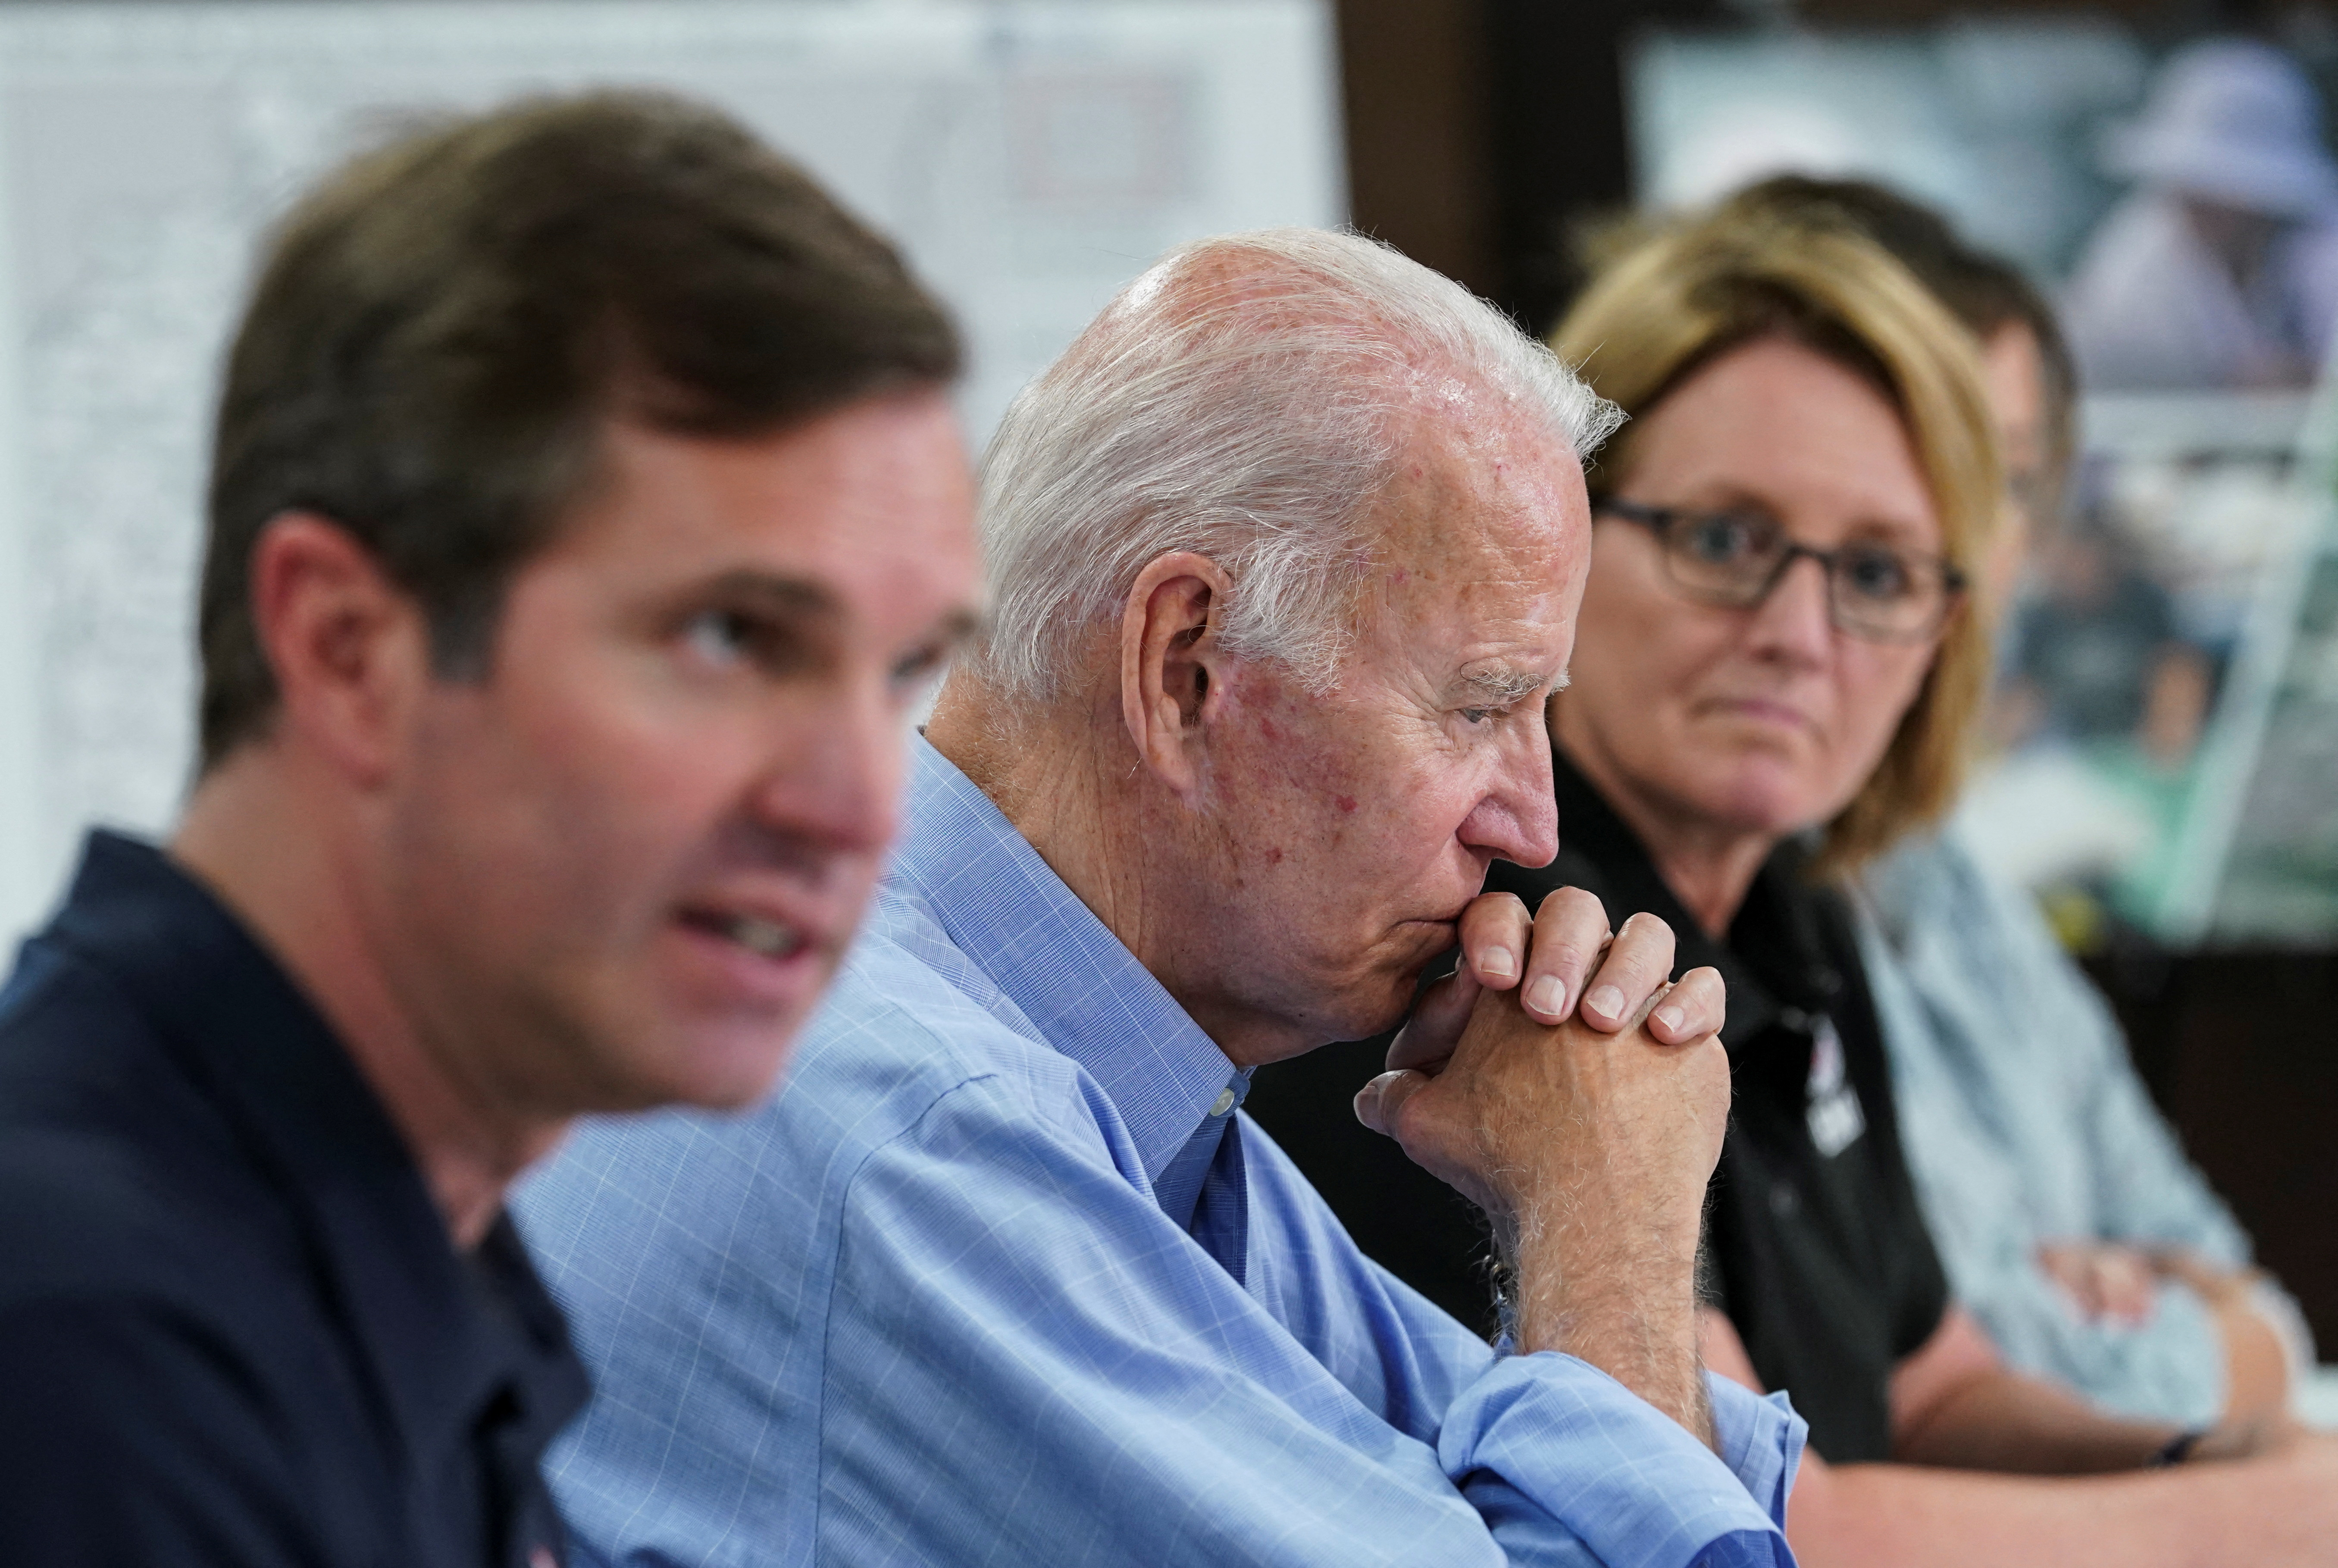 U.S. President Joe Biden travels to eastern Kentucky to visit families affected by devastation from recent flooding